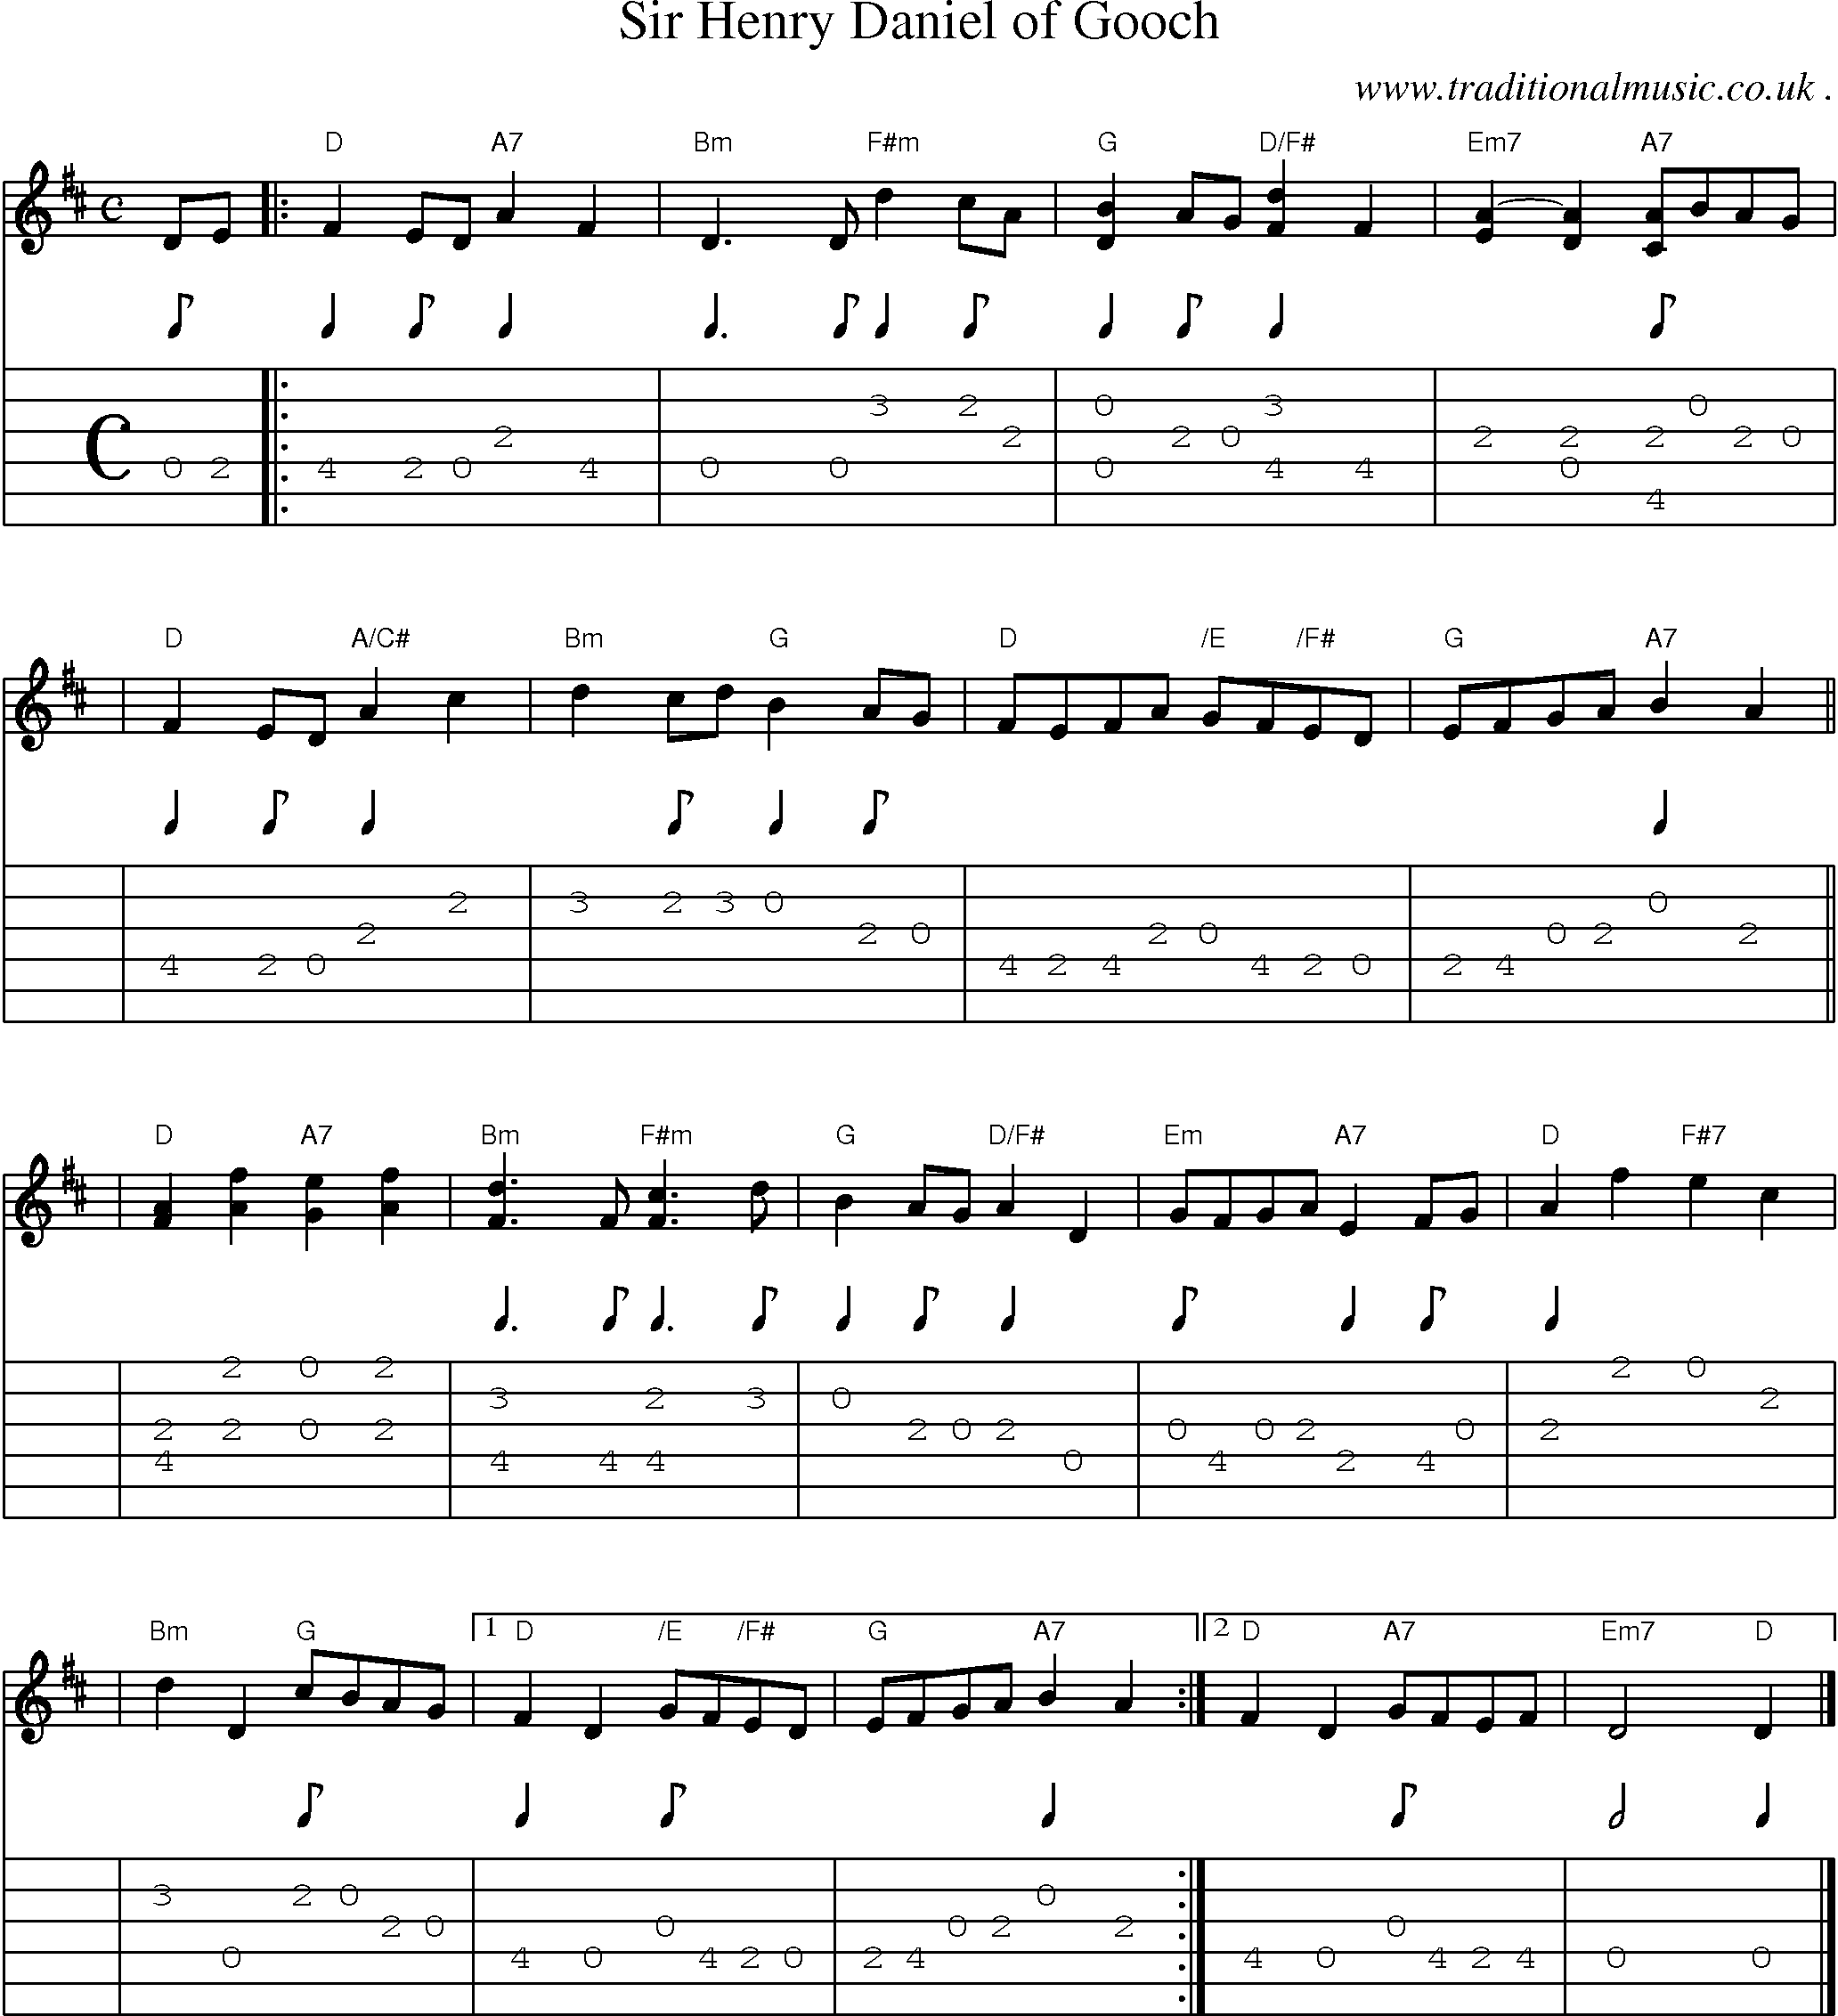 Sheet-music  score, Chords and Guitar Tabs for Sir Henry Daniel Of Gooch